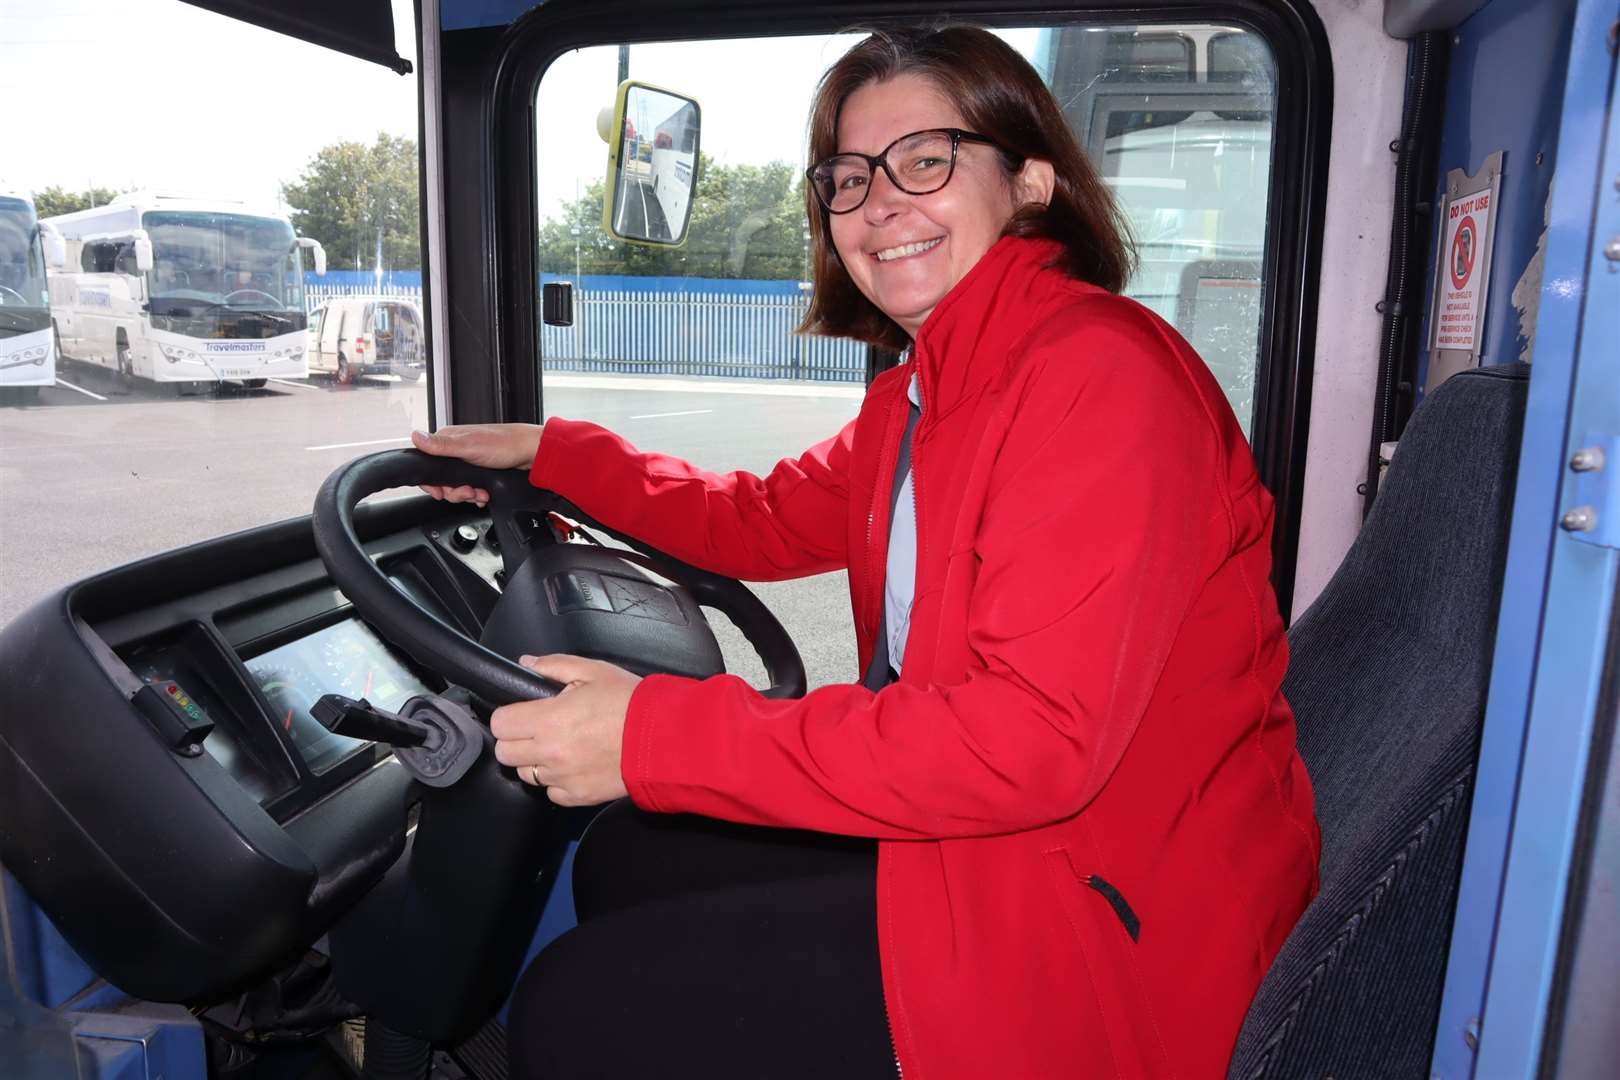 Major Lynne Clifton of Sheerness Salvation Army at the wheel of Sheppey Community Development Forum's community supermarket bus donated by Tim Lambkin of Travelmasters